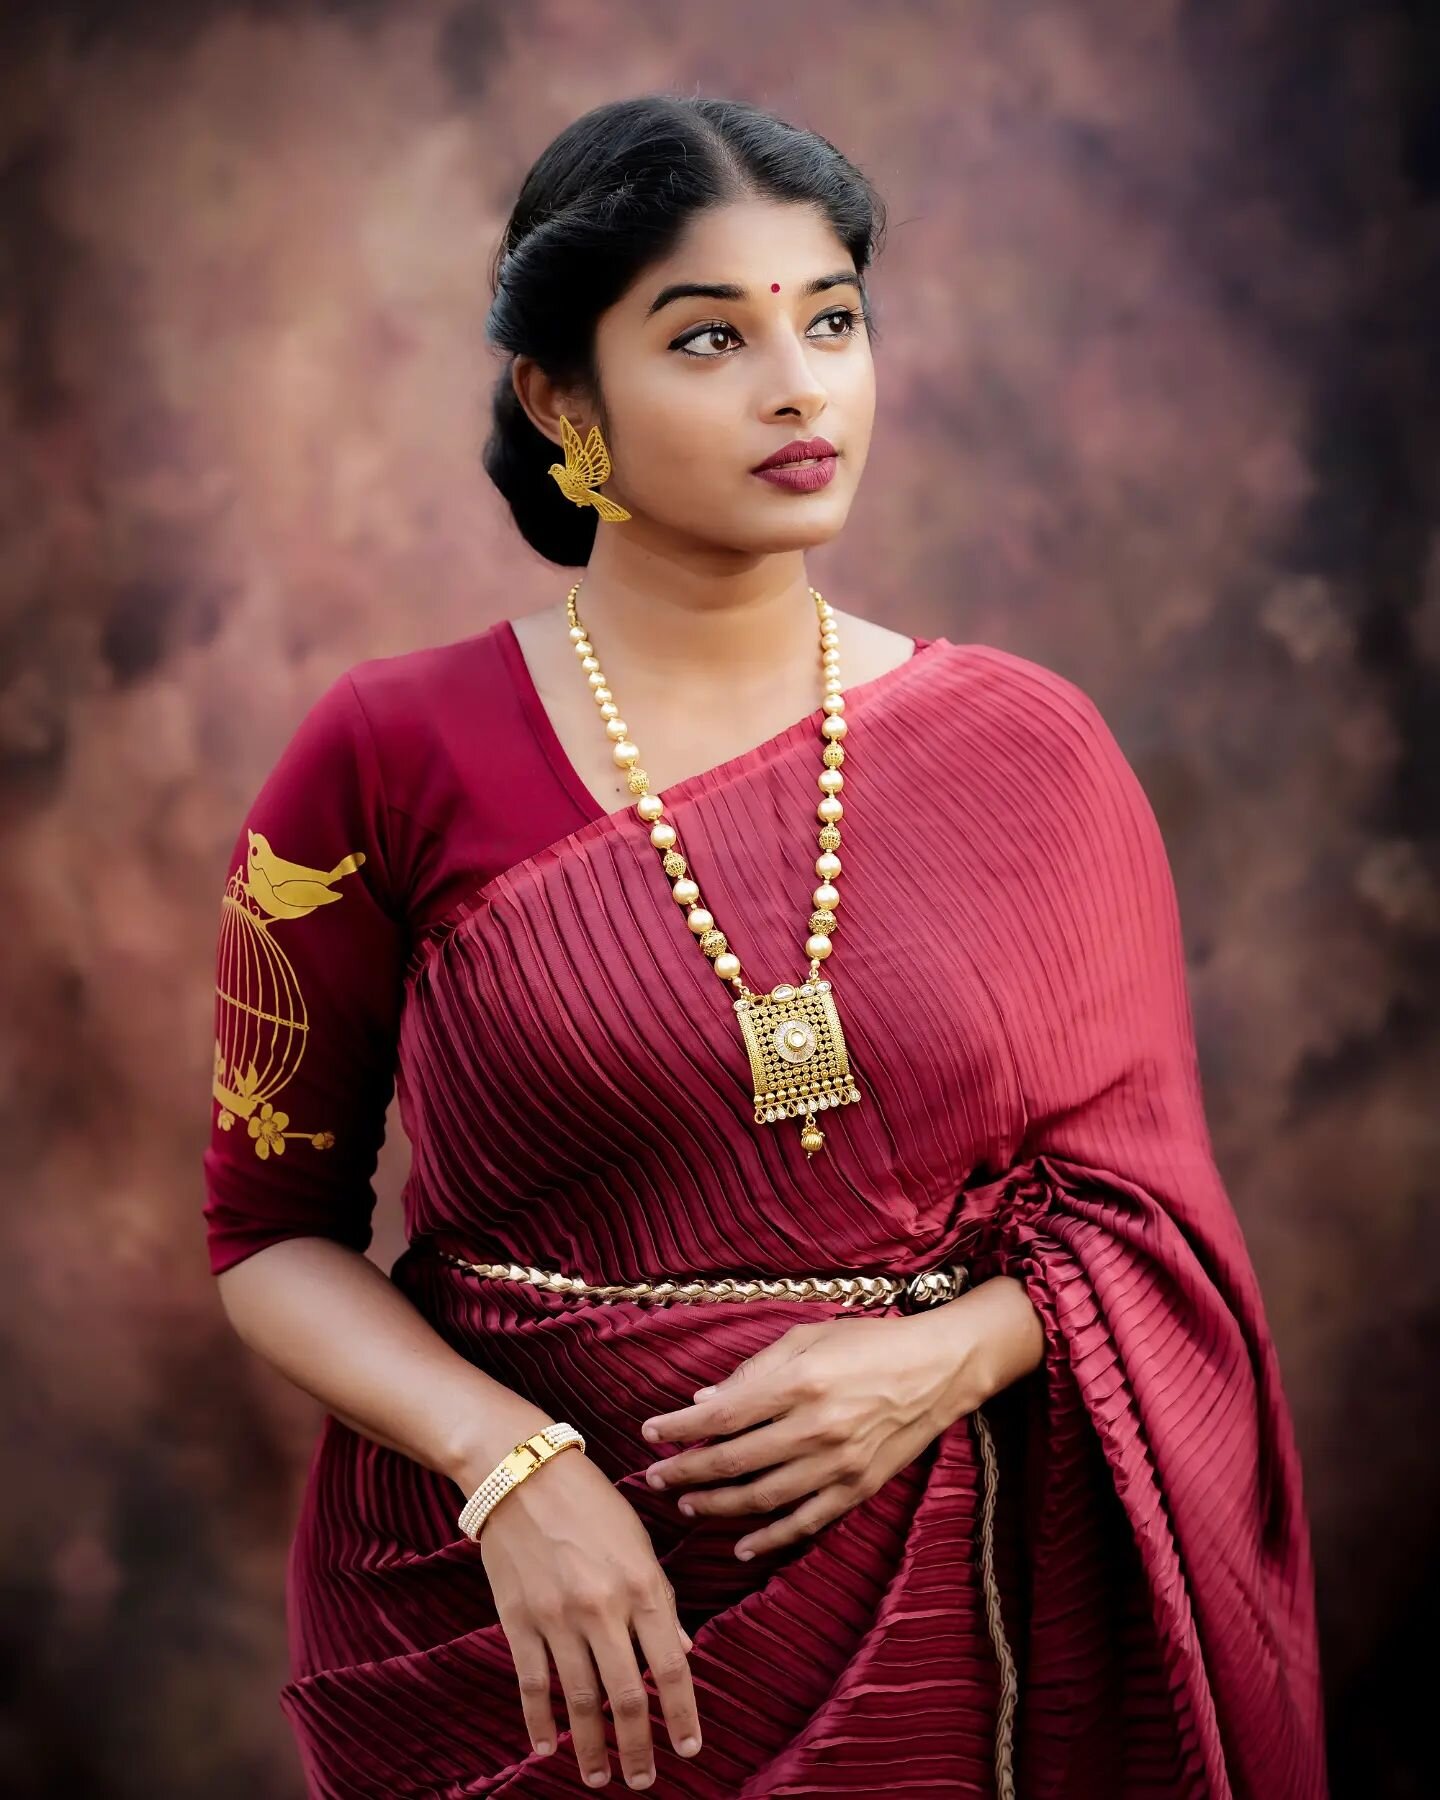 South Actress Sheela Rajkumar  In a Maroon Pleated Saree With Printed Sleeves Blouse Styled With a Braided Waist Belt - Effortless Fashionable Looks & Outfits 